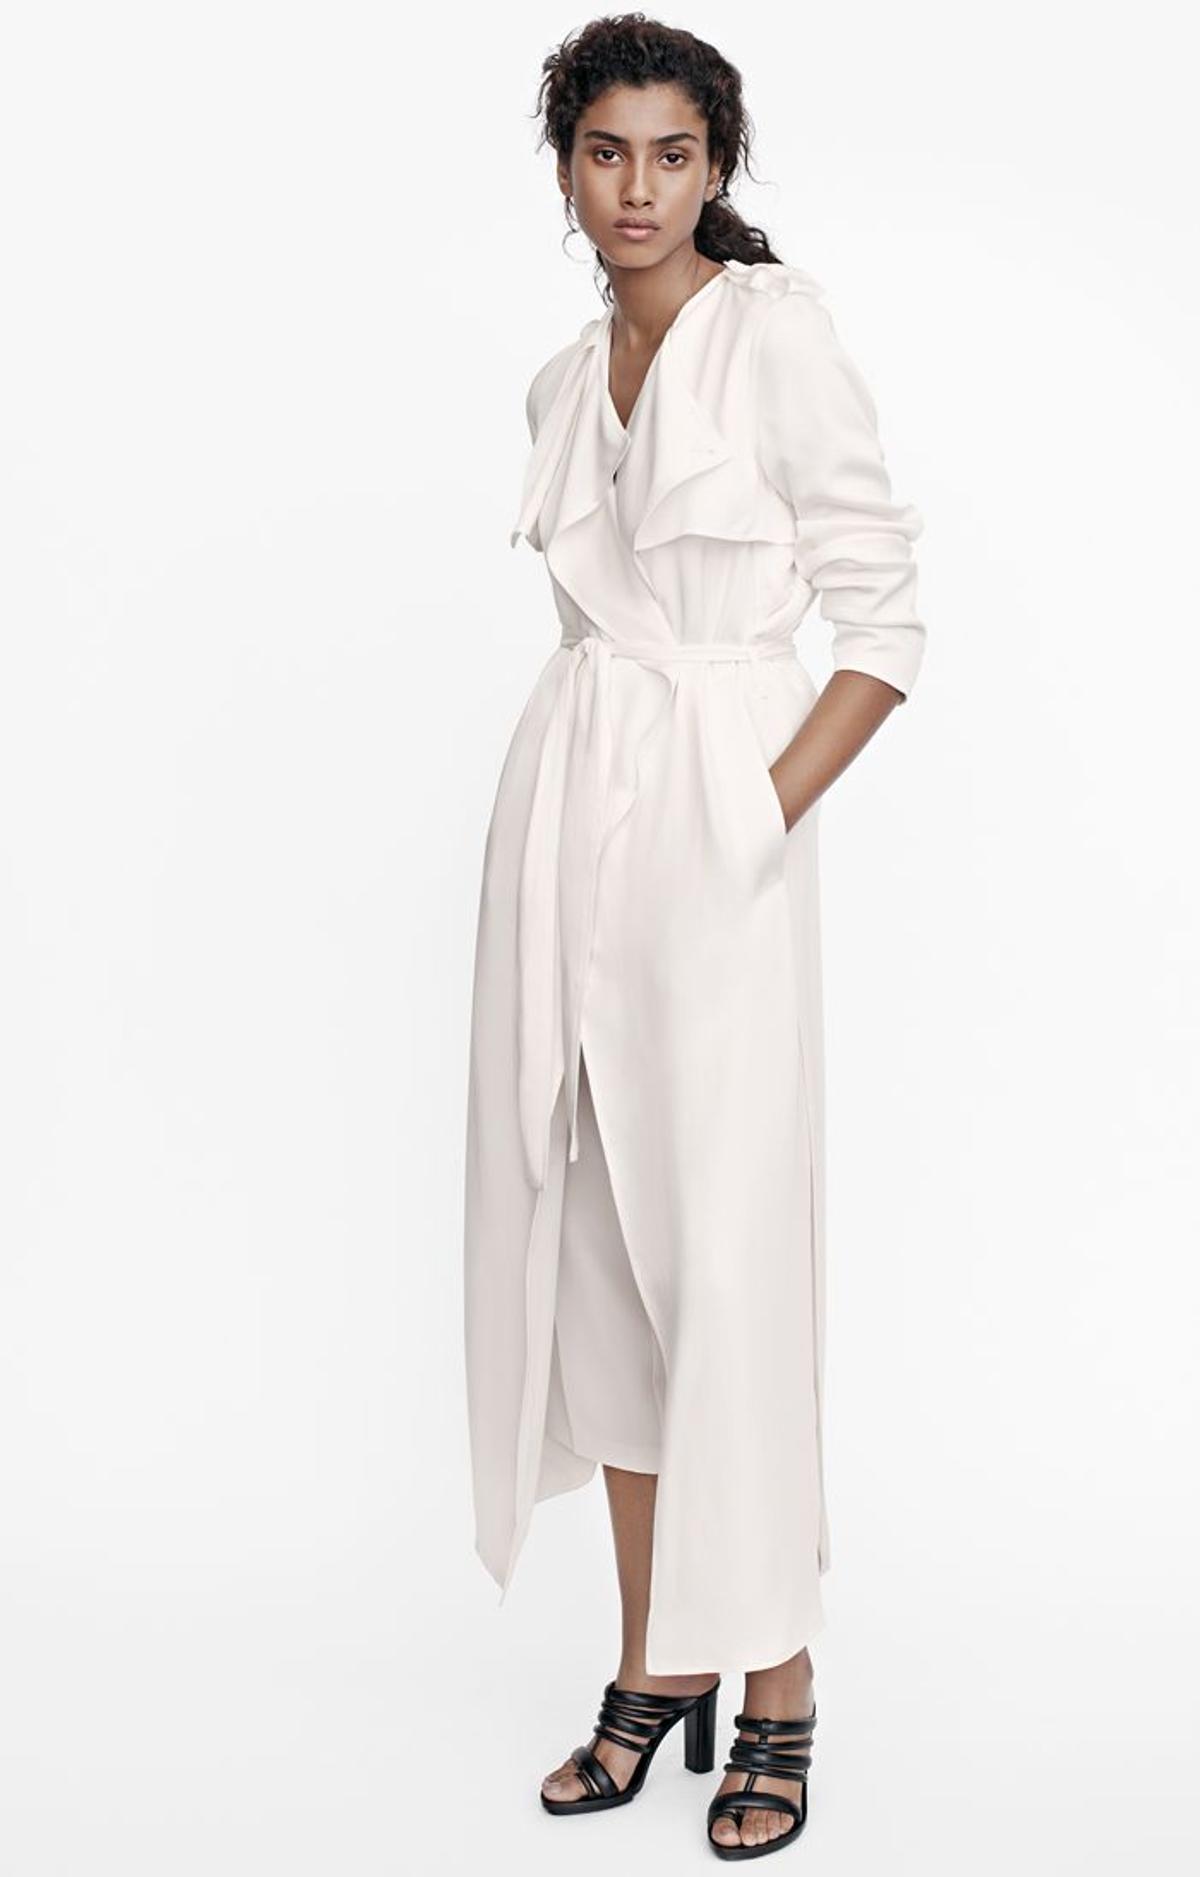 Conscious Exclusive by H&amp;M, chaqueta blanca